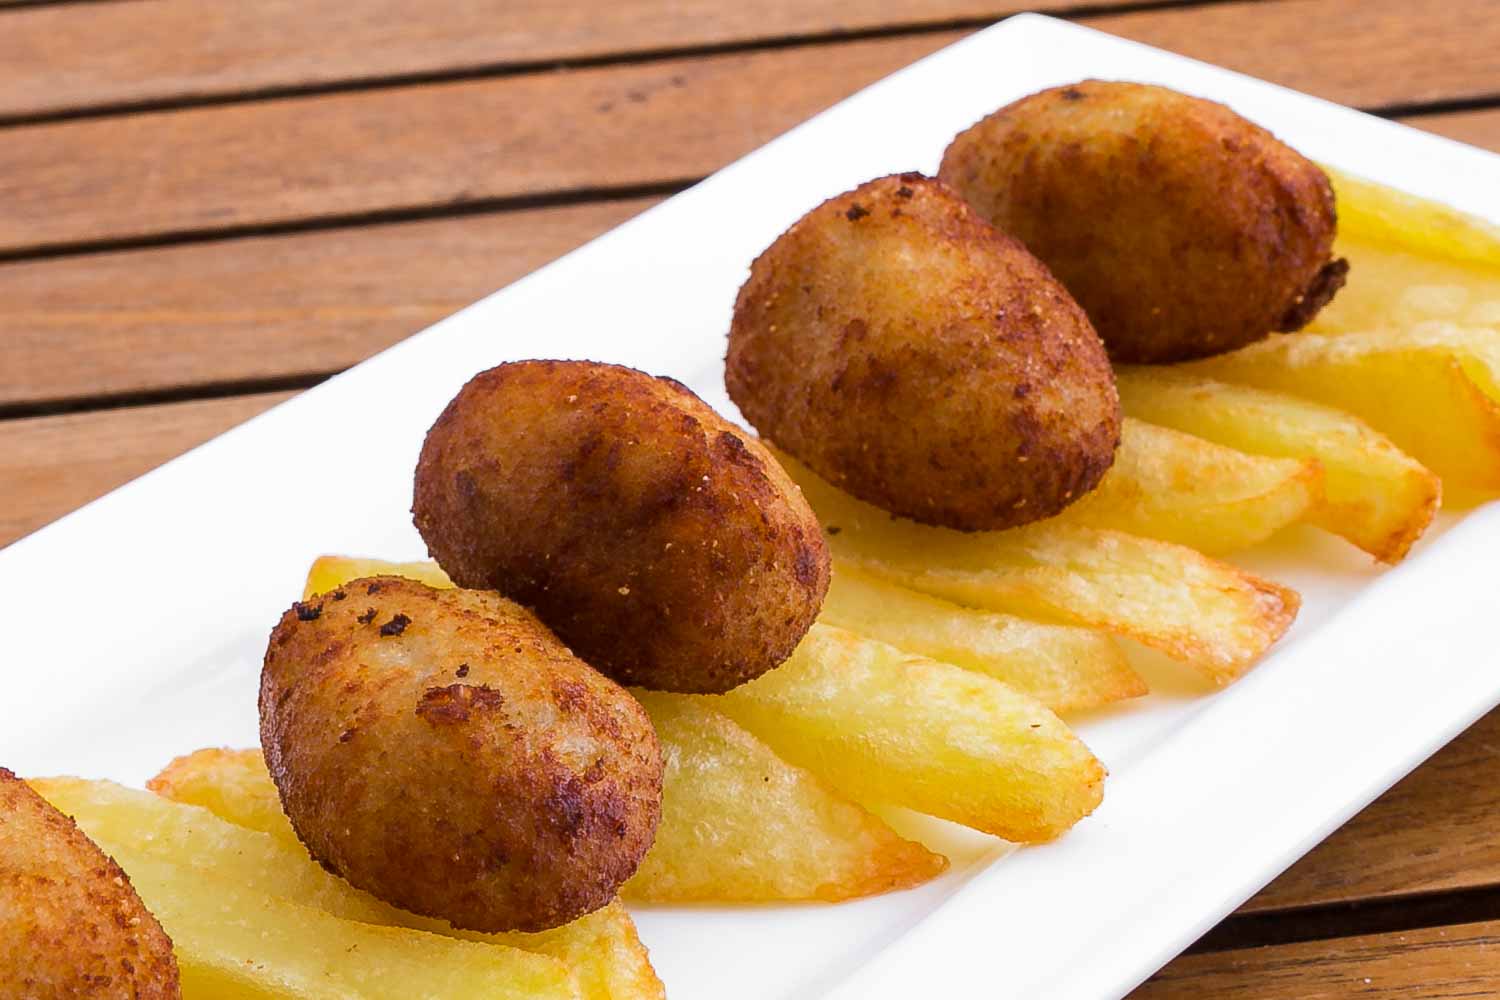 Iberian meat croquettes